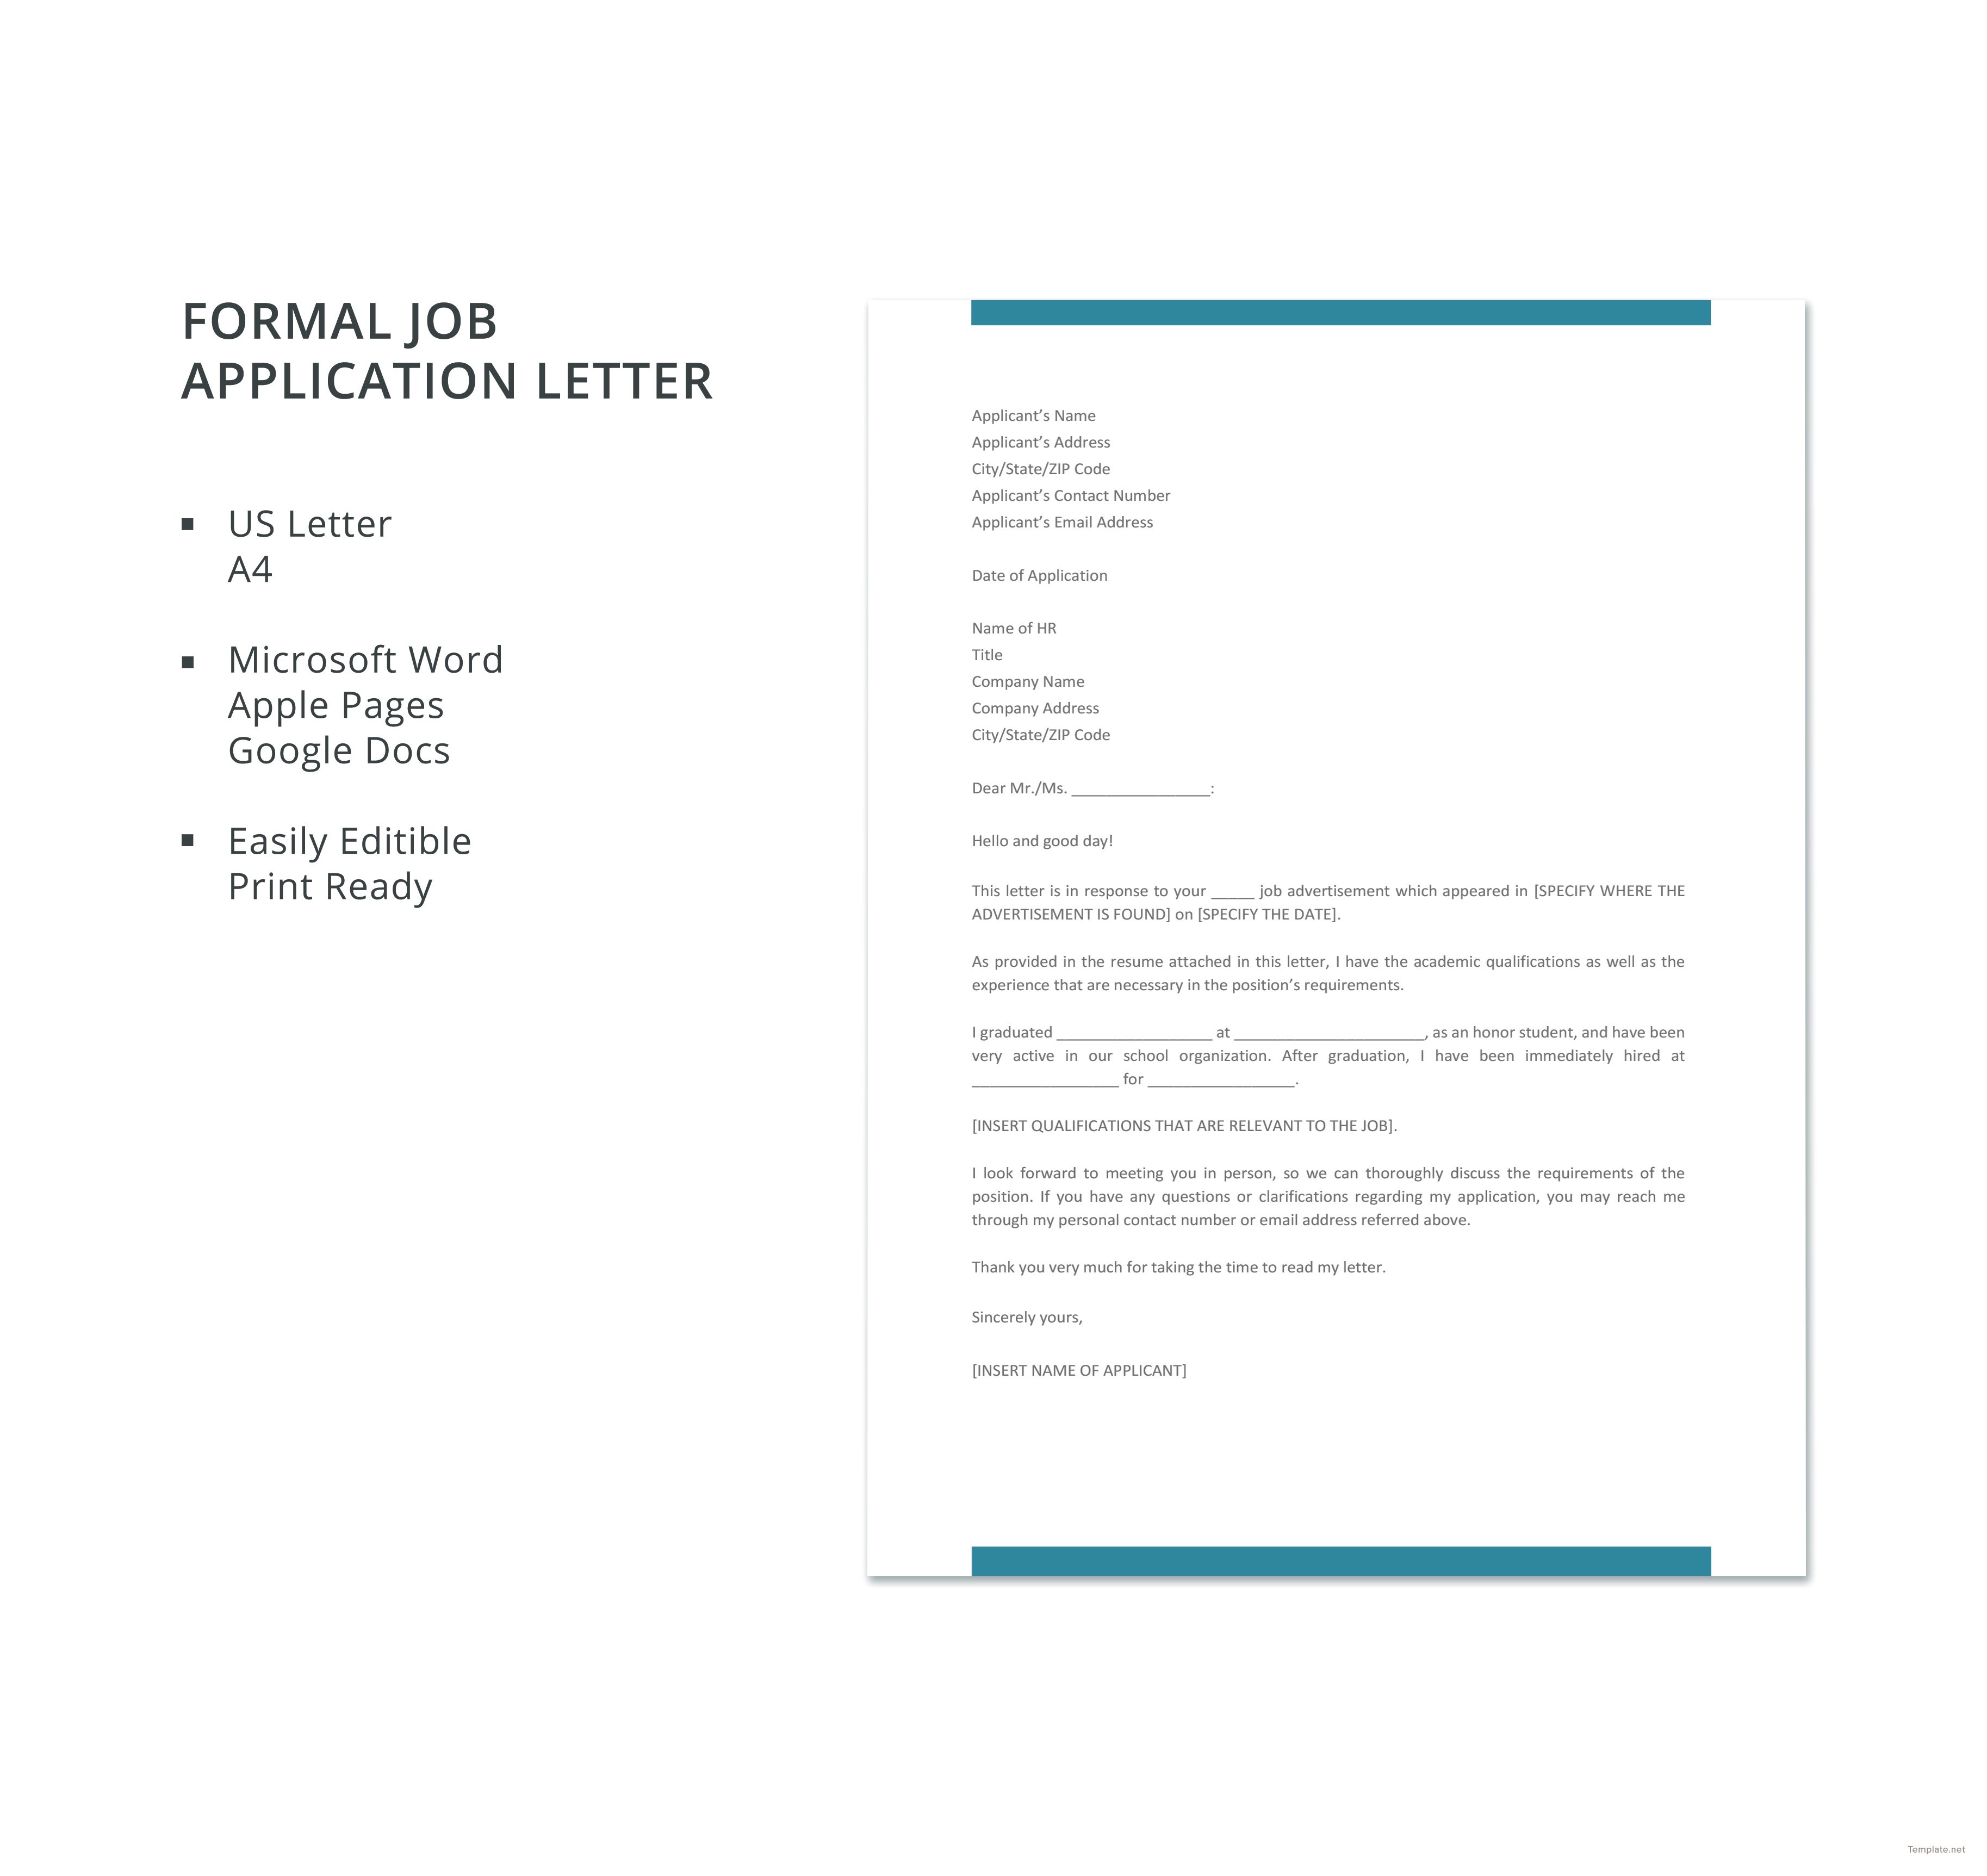 in writing a job application letter which of the following is typically the first section